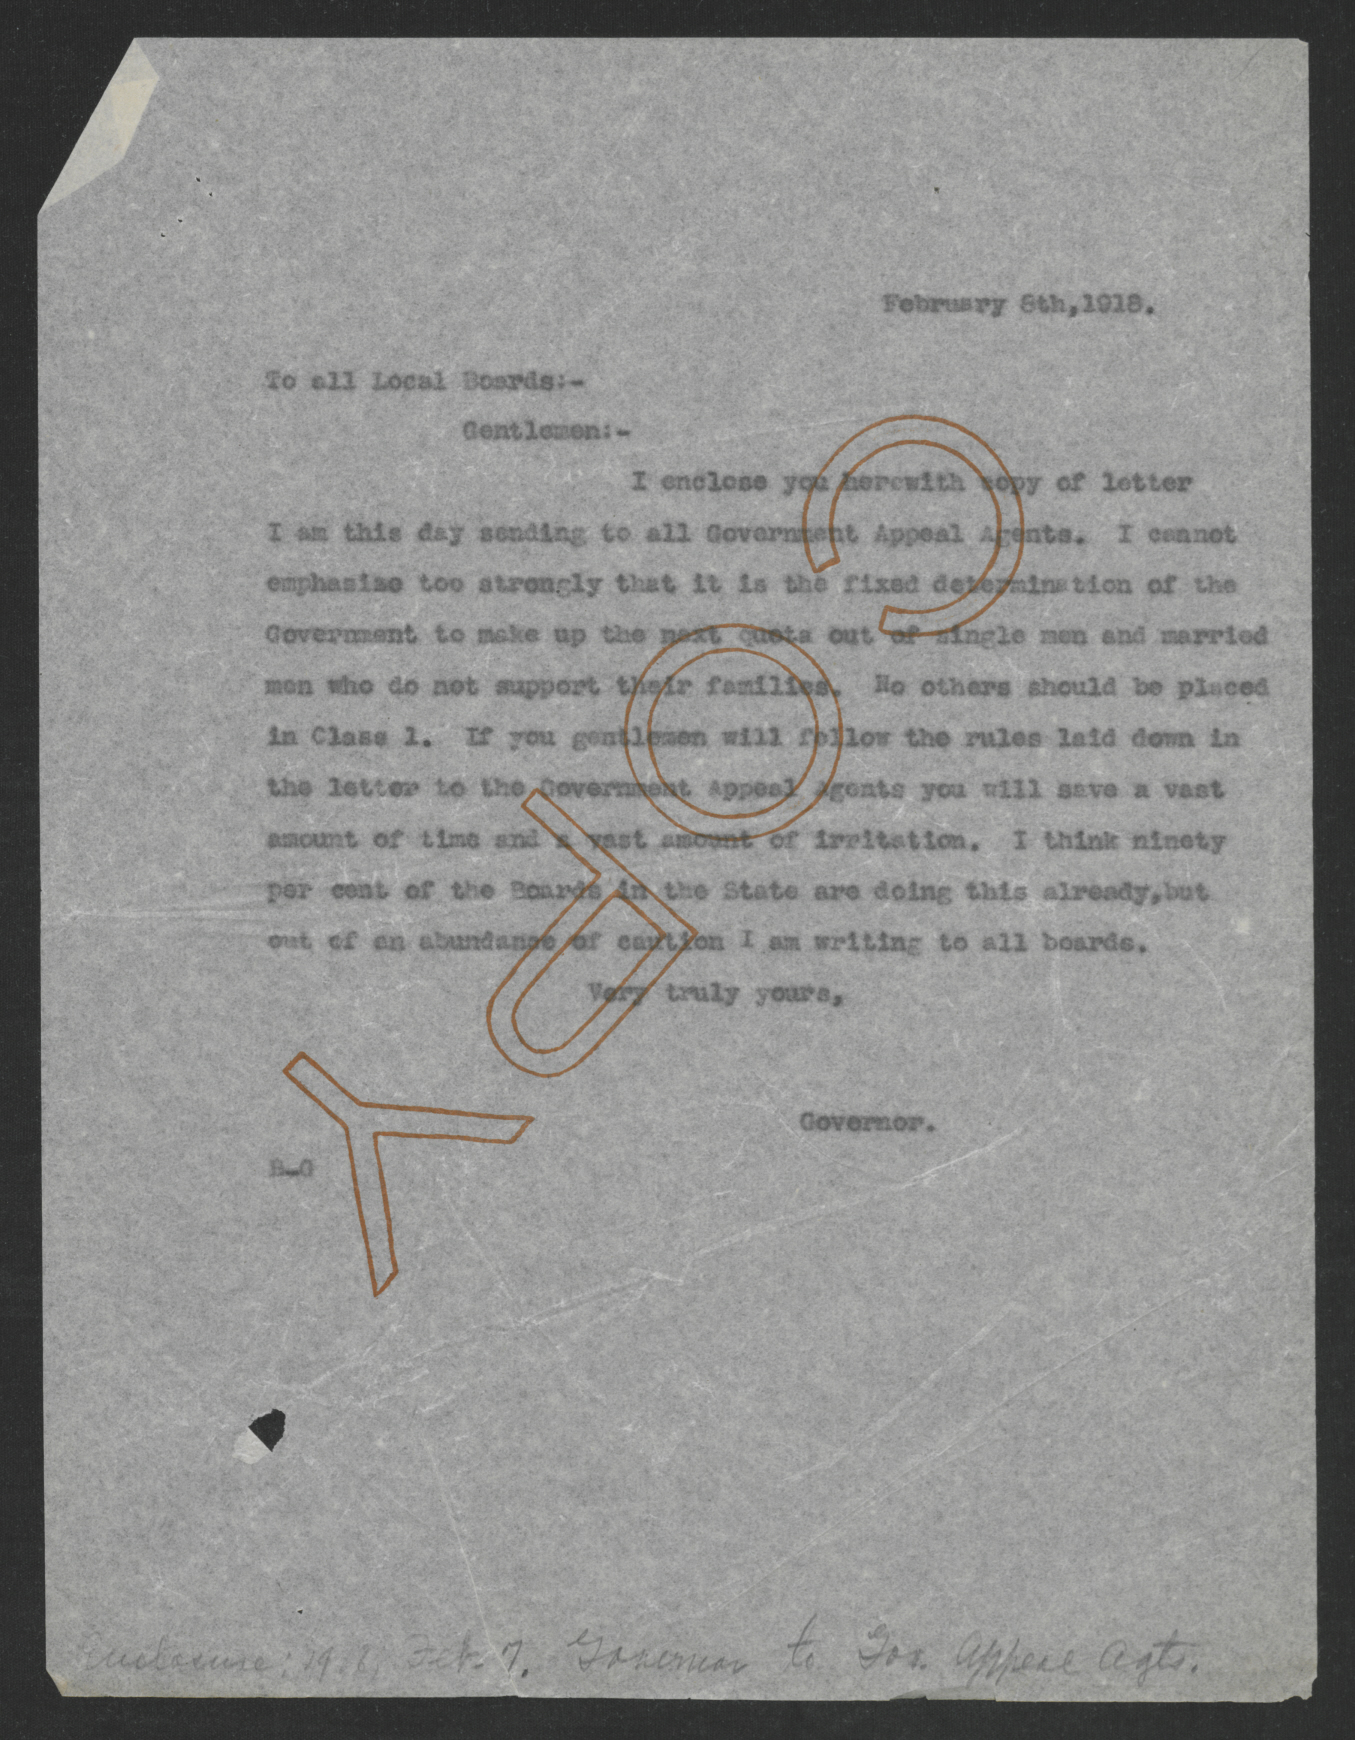 Letter from Thomas W. Bickett to All Local Boards, February 8, 1918